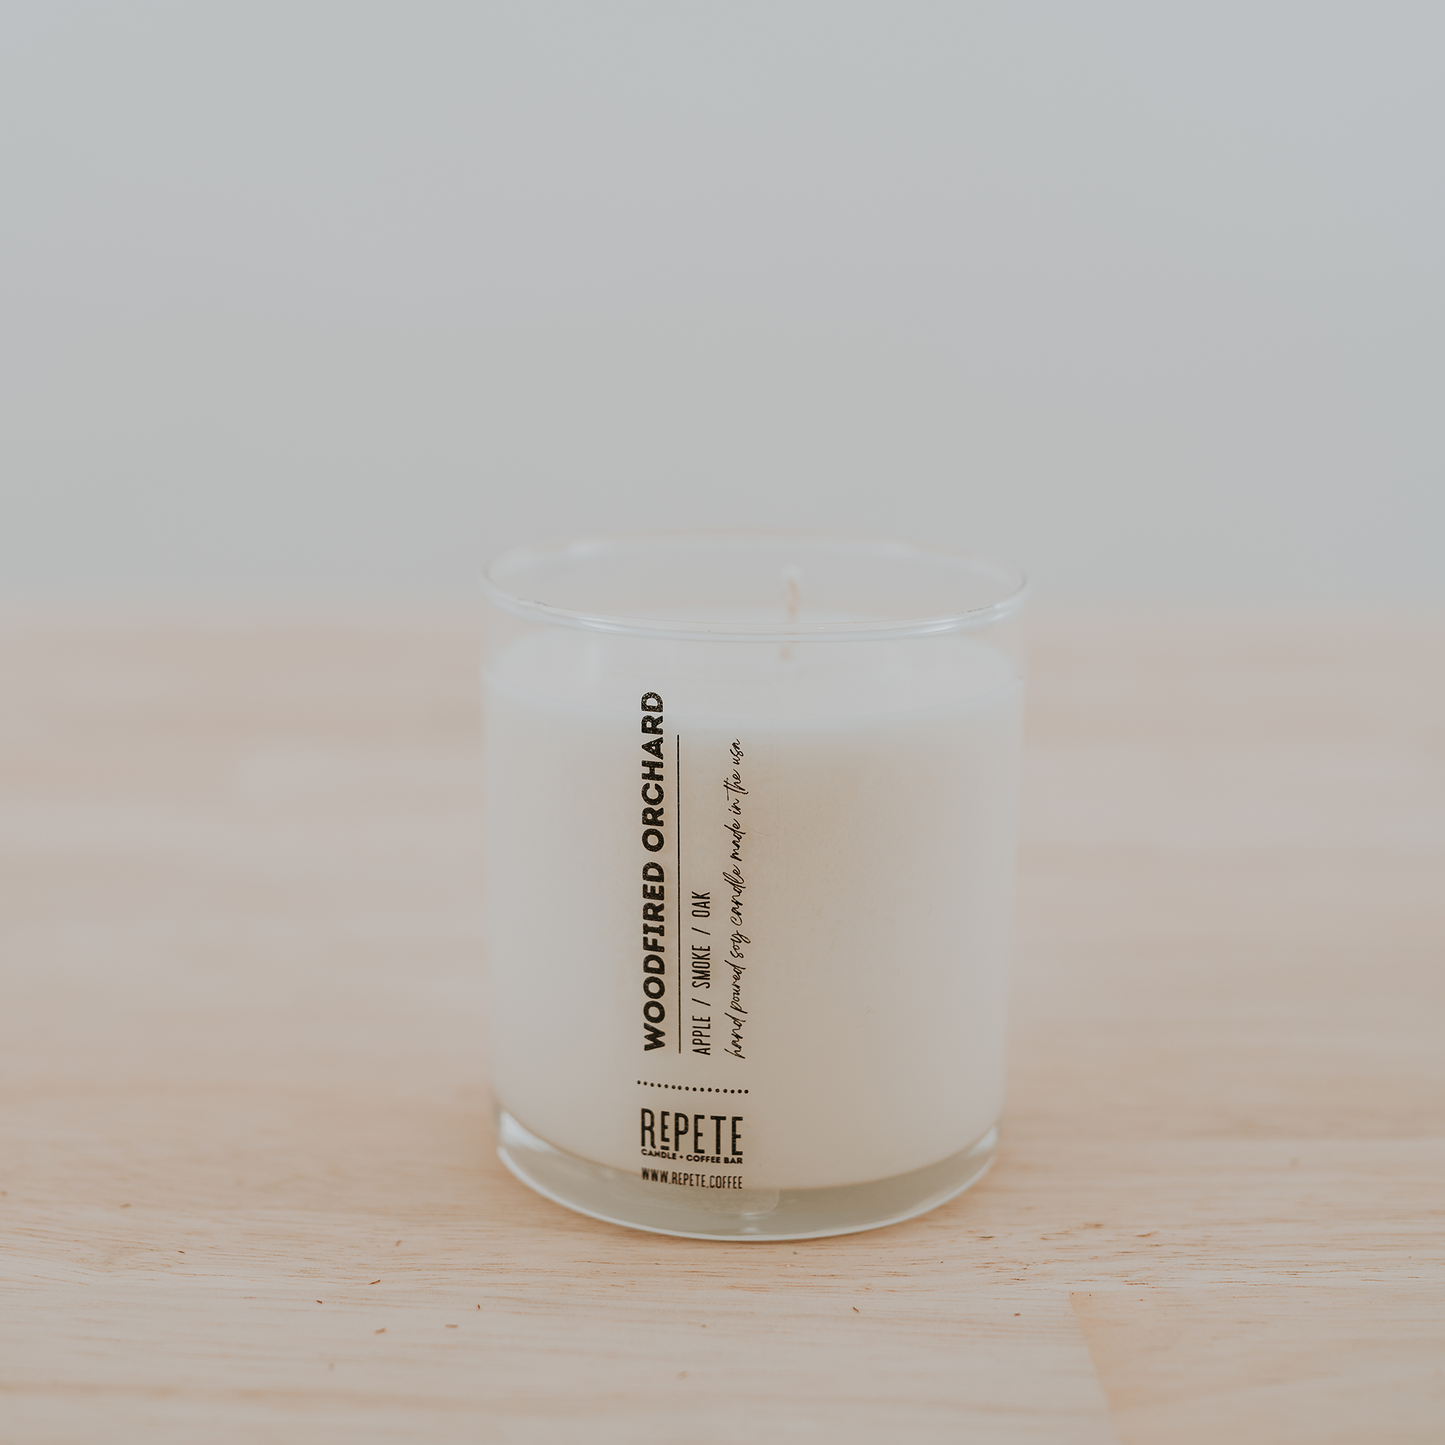 Woodfired Orchard nine ounce candle from Repete Candle and Coffee Bar